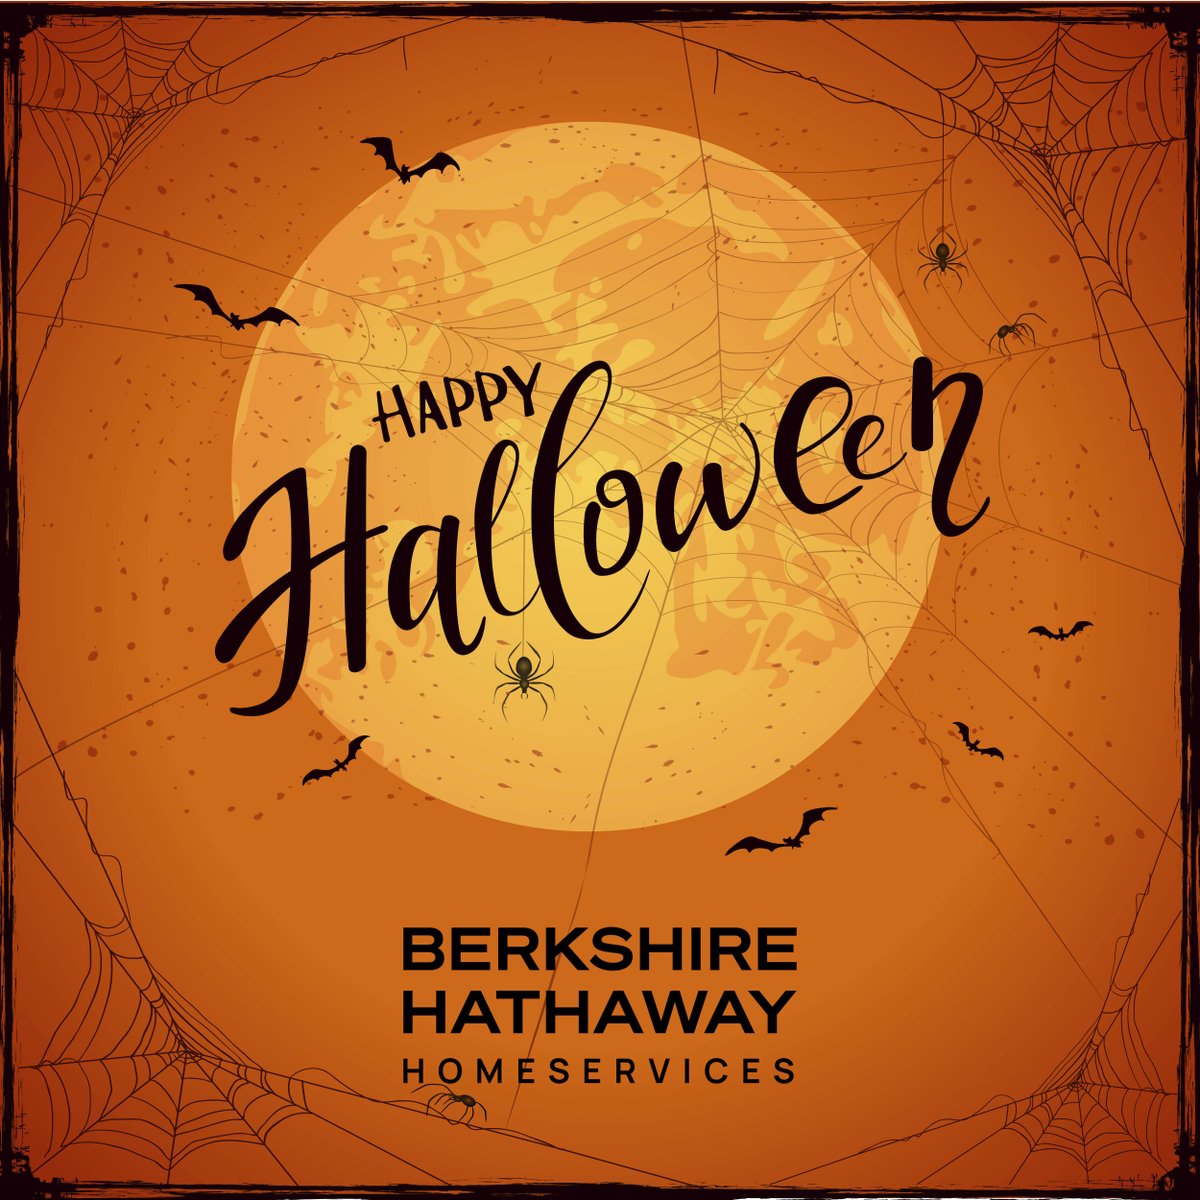 Looking for a boo-tiful home? I've got you covered! No tricks, just treats. Get in touch to find out how we can help with your real estate goals this spooky season. #Halloween #BHHS #BHHSRealEstate